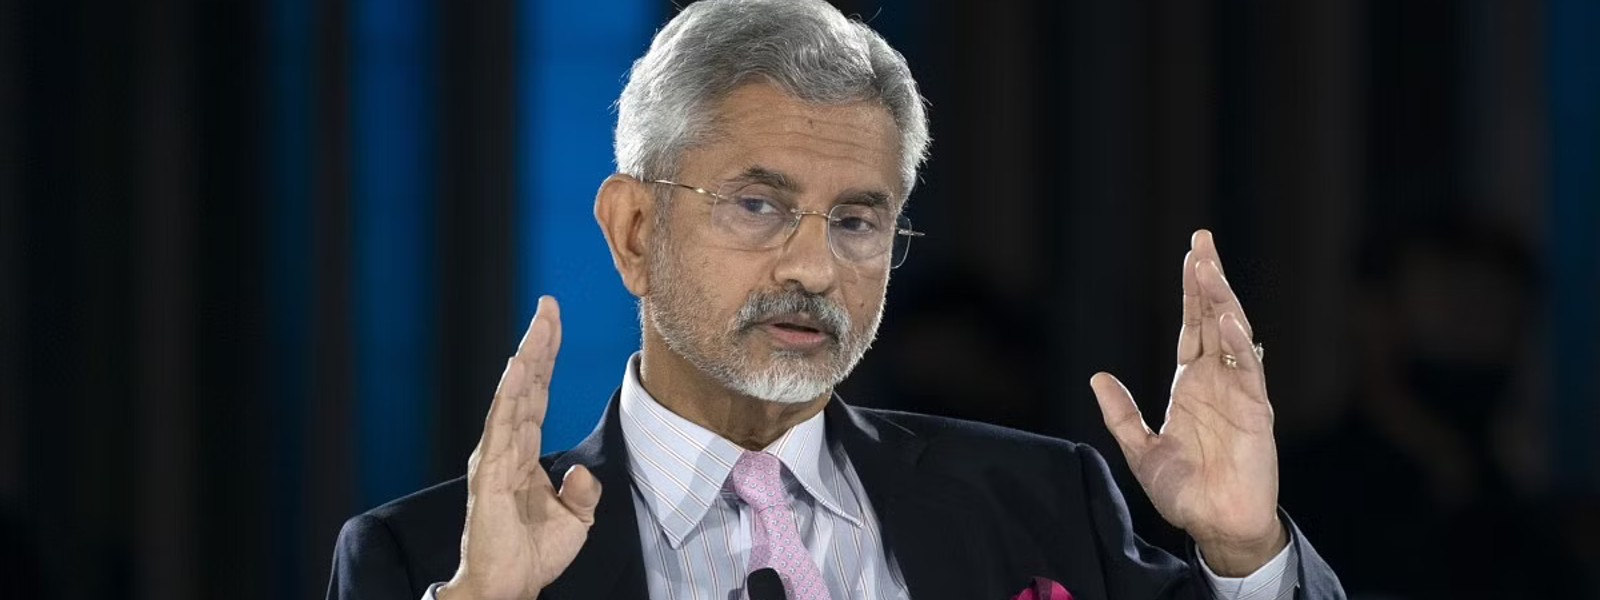 “Relationship Not Normal, Can’t Be…”: S Jaishankar On India-China Ties